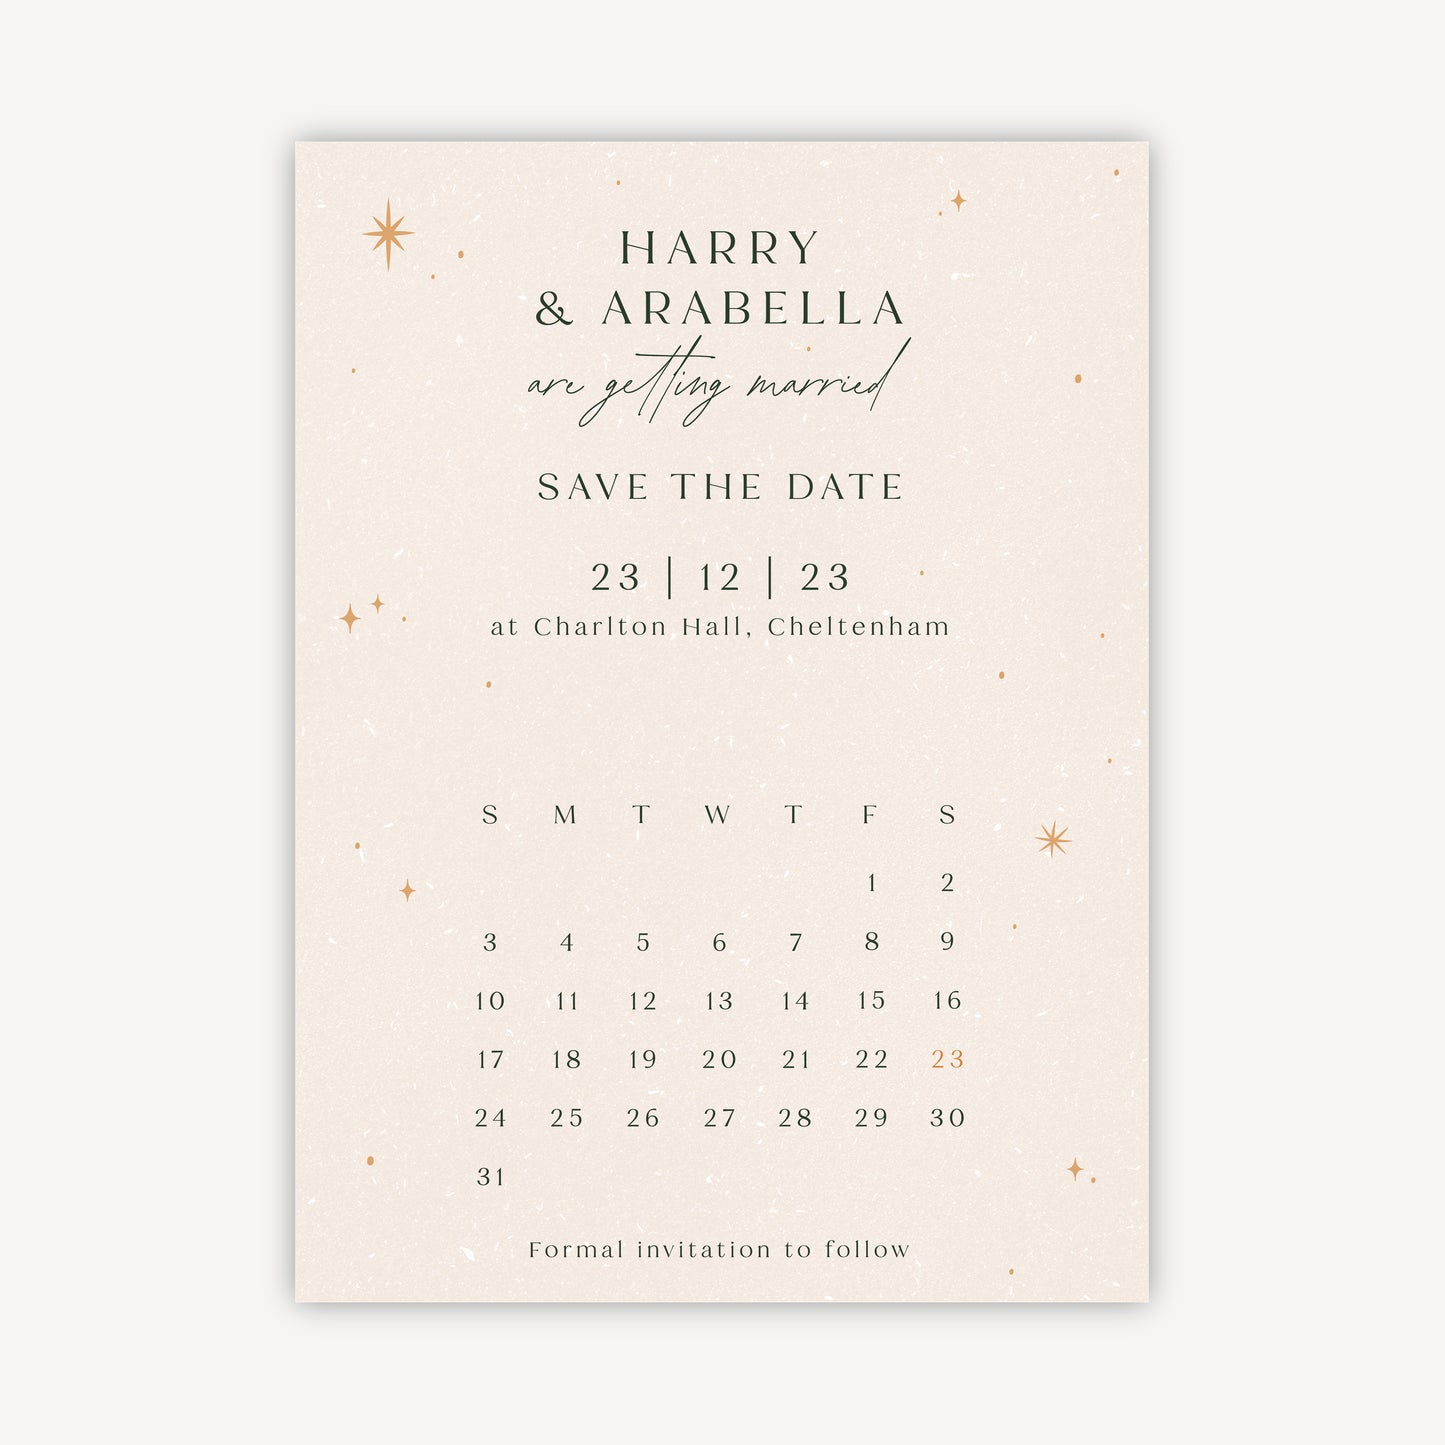 Winter Christmas Folded Wedding Save the Date